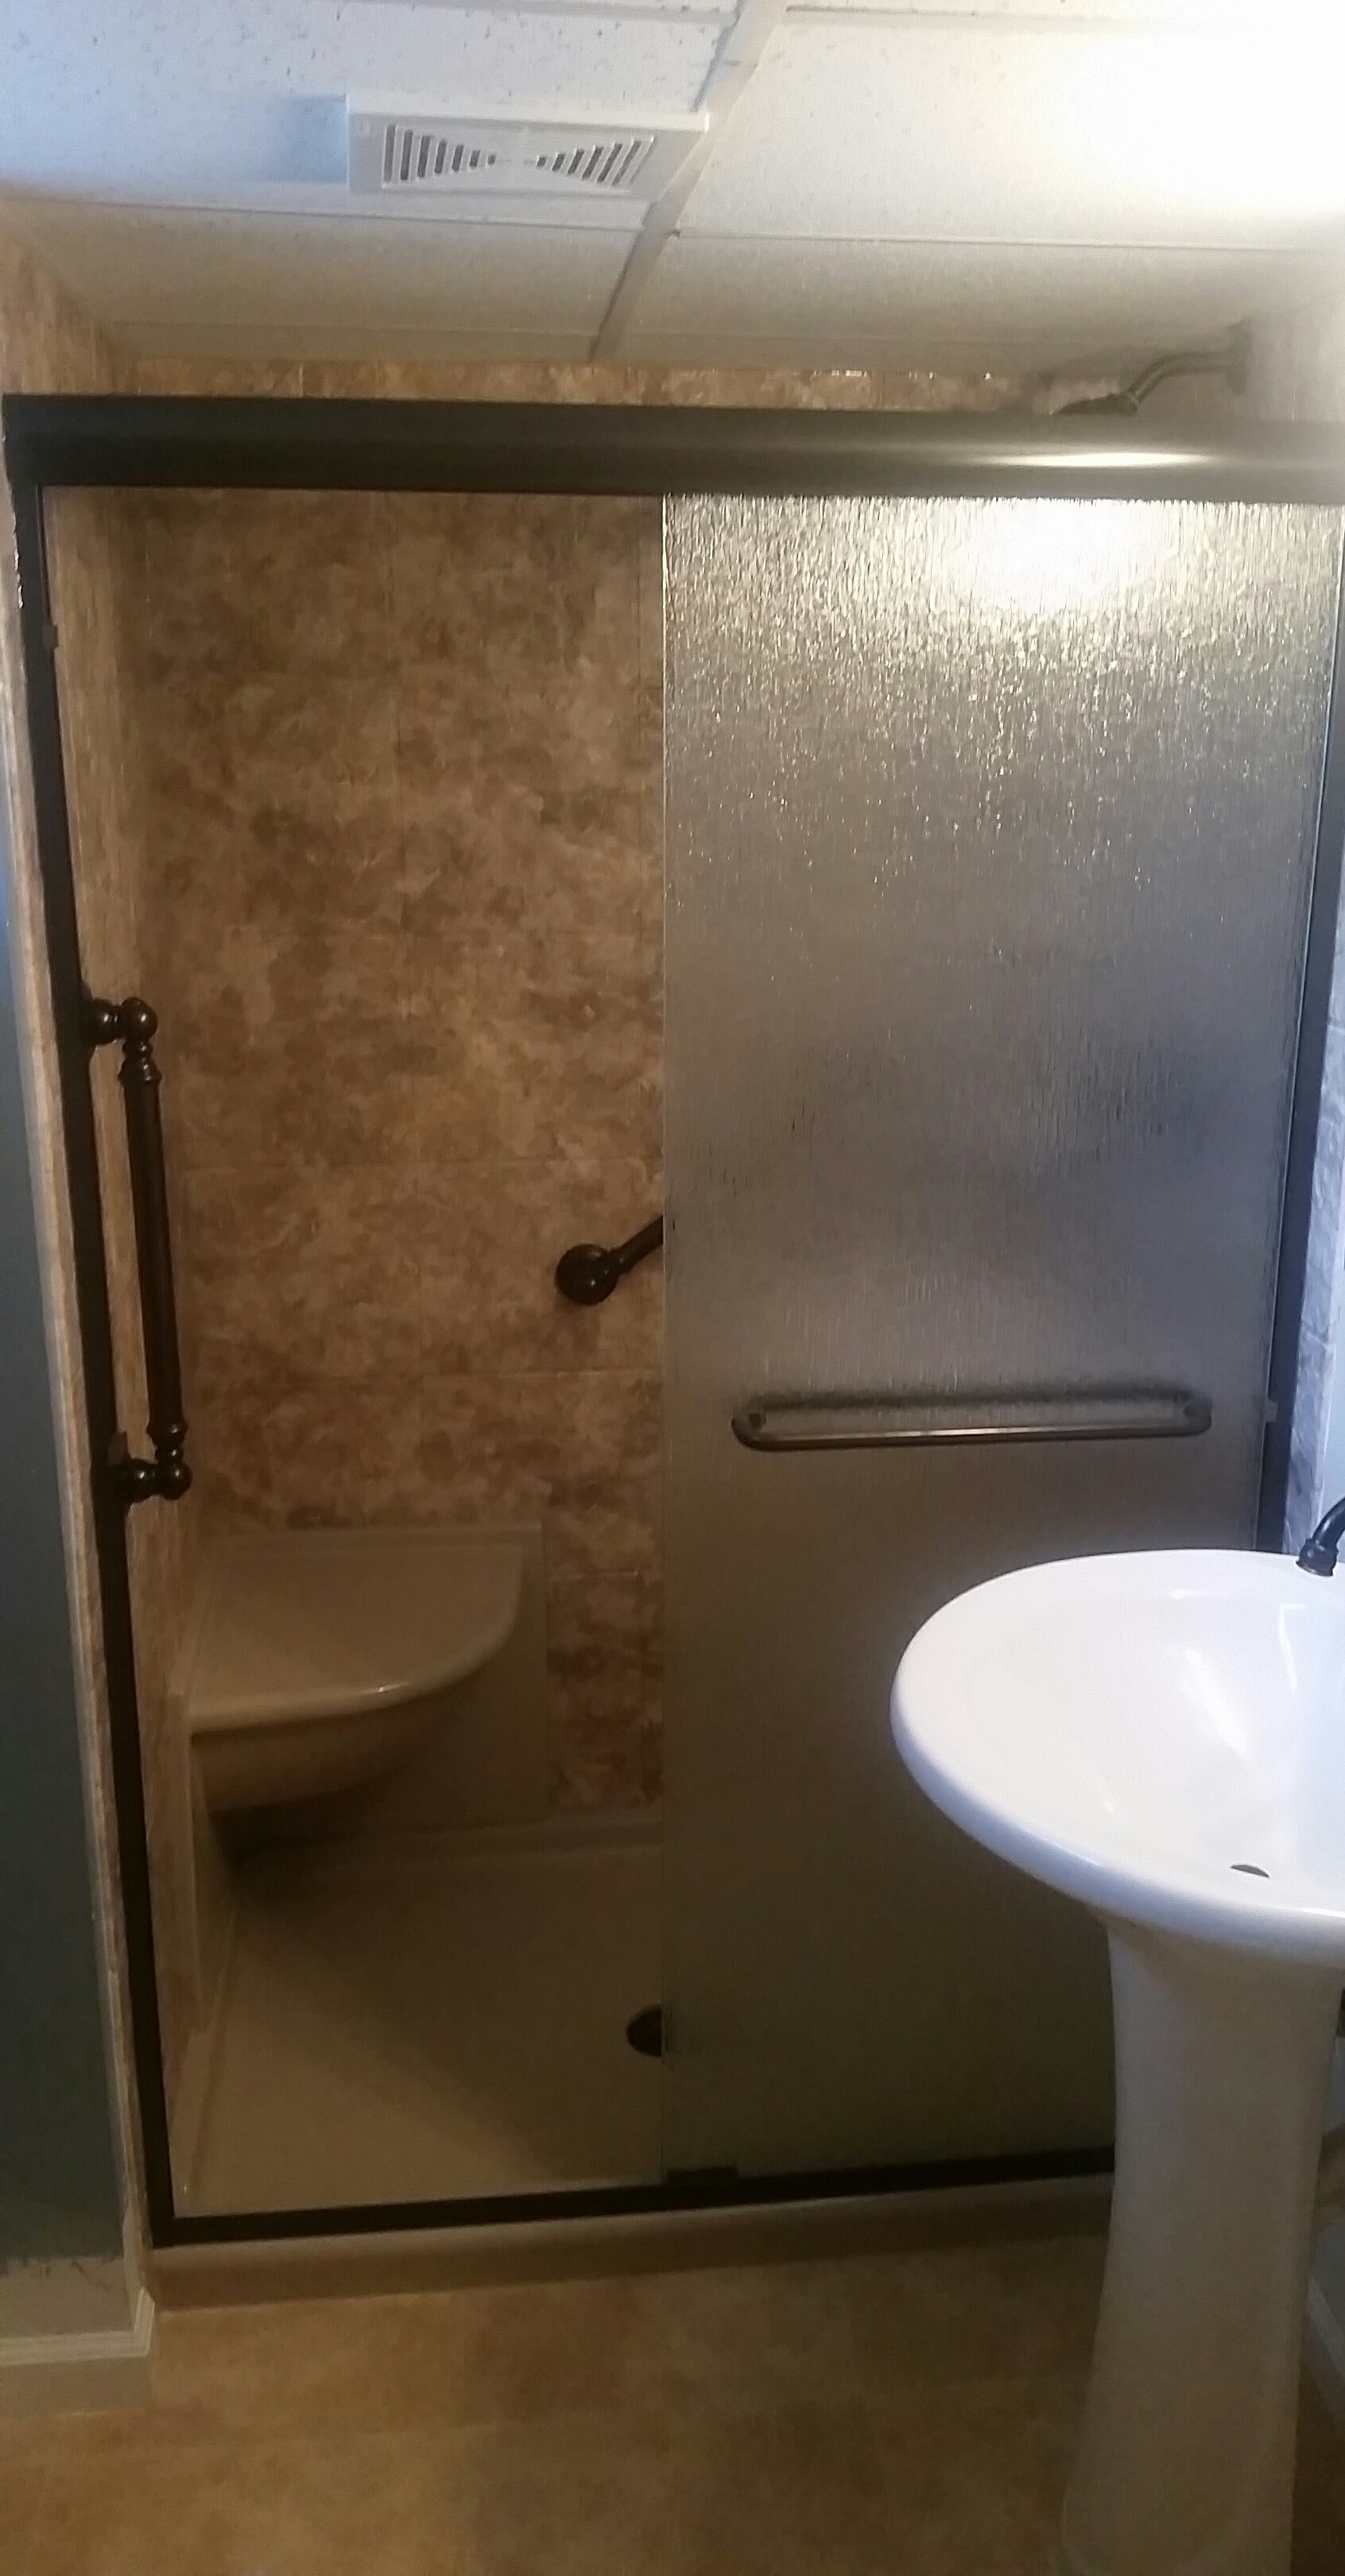 AFTER - New Acrylic Surround in River Rock 12x12 Slate pattern with Sandbar Shower Base and Seat